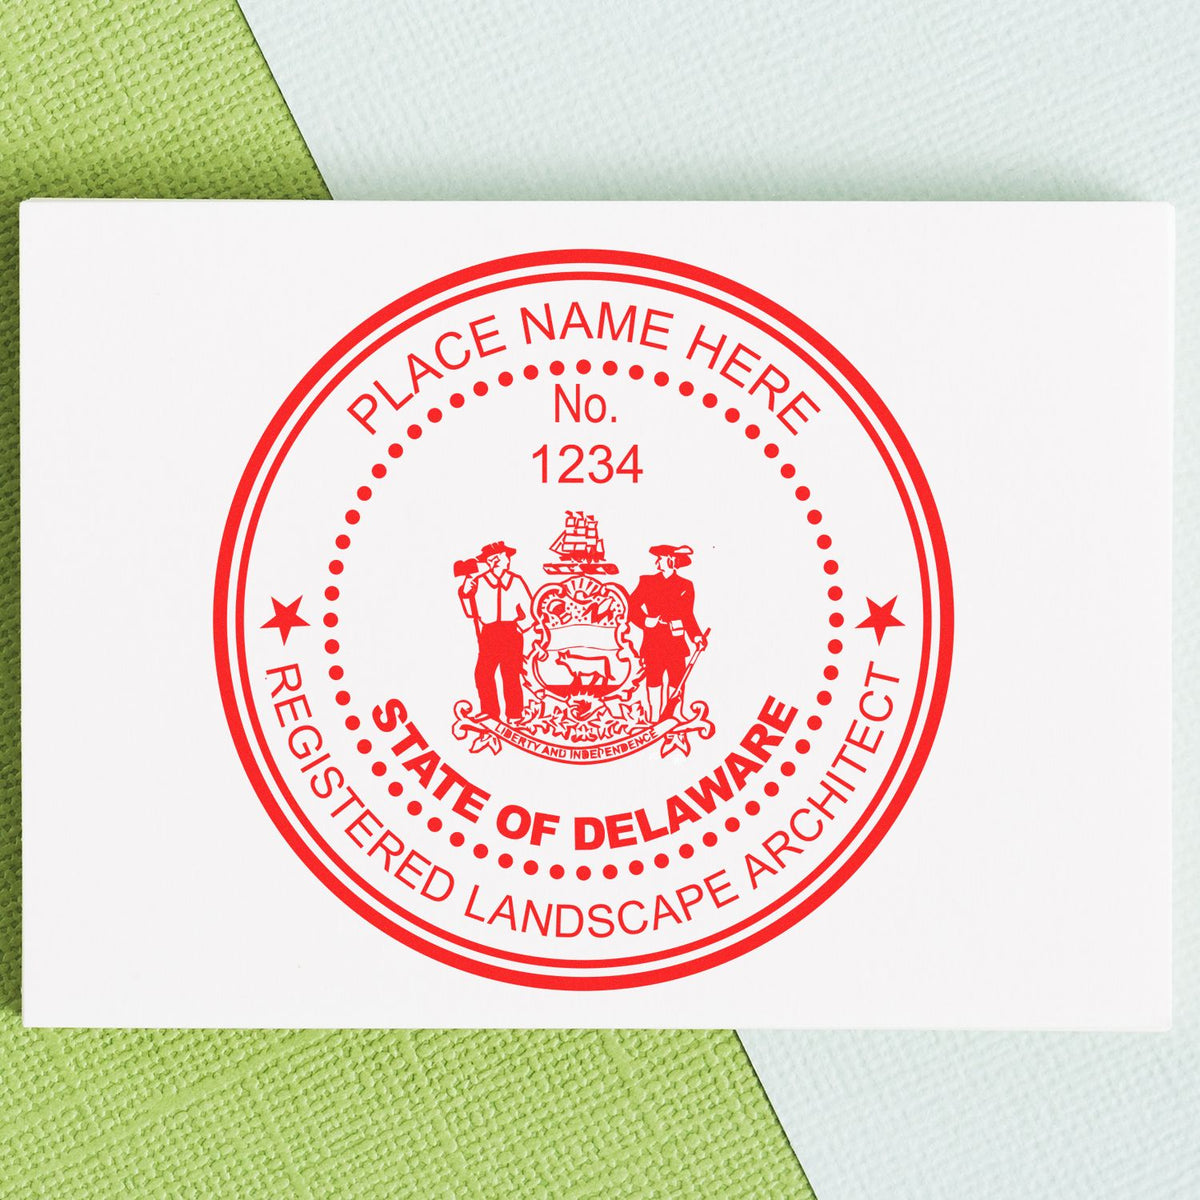 A photograph of the Digital Delaware Landscape Architect Stamp stamp impression reveals a vivid, professional image of the on paper.